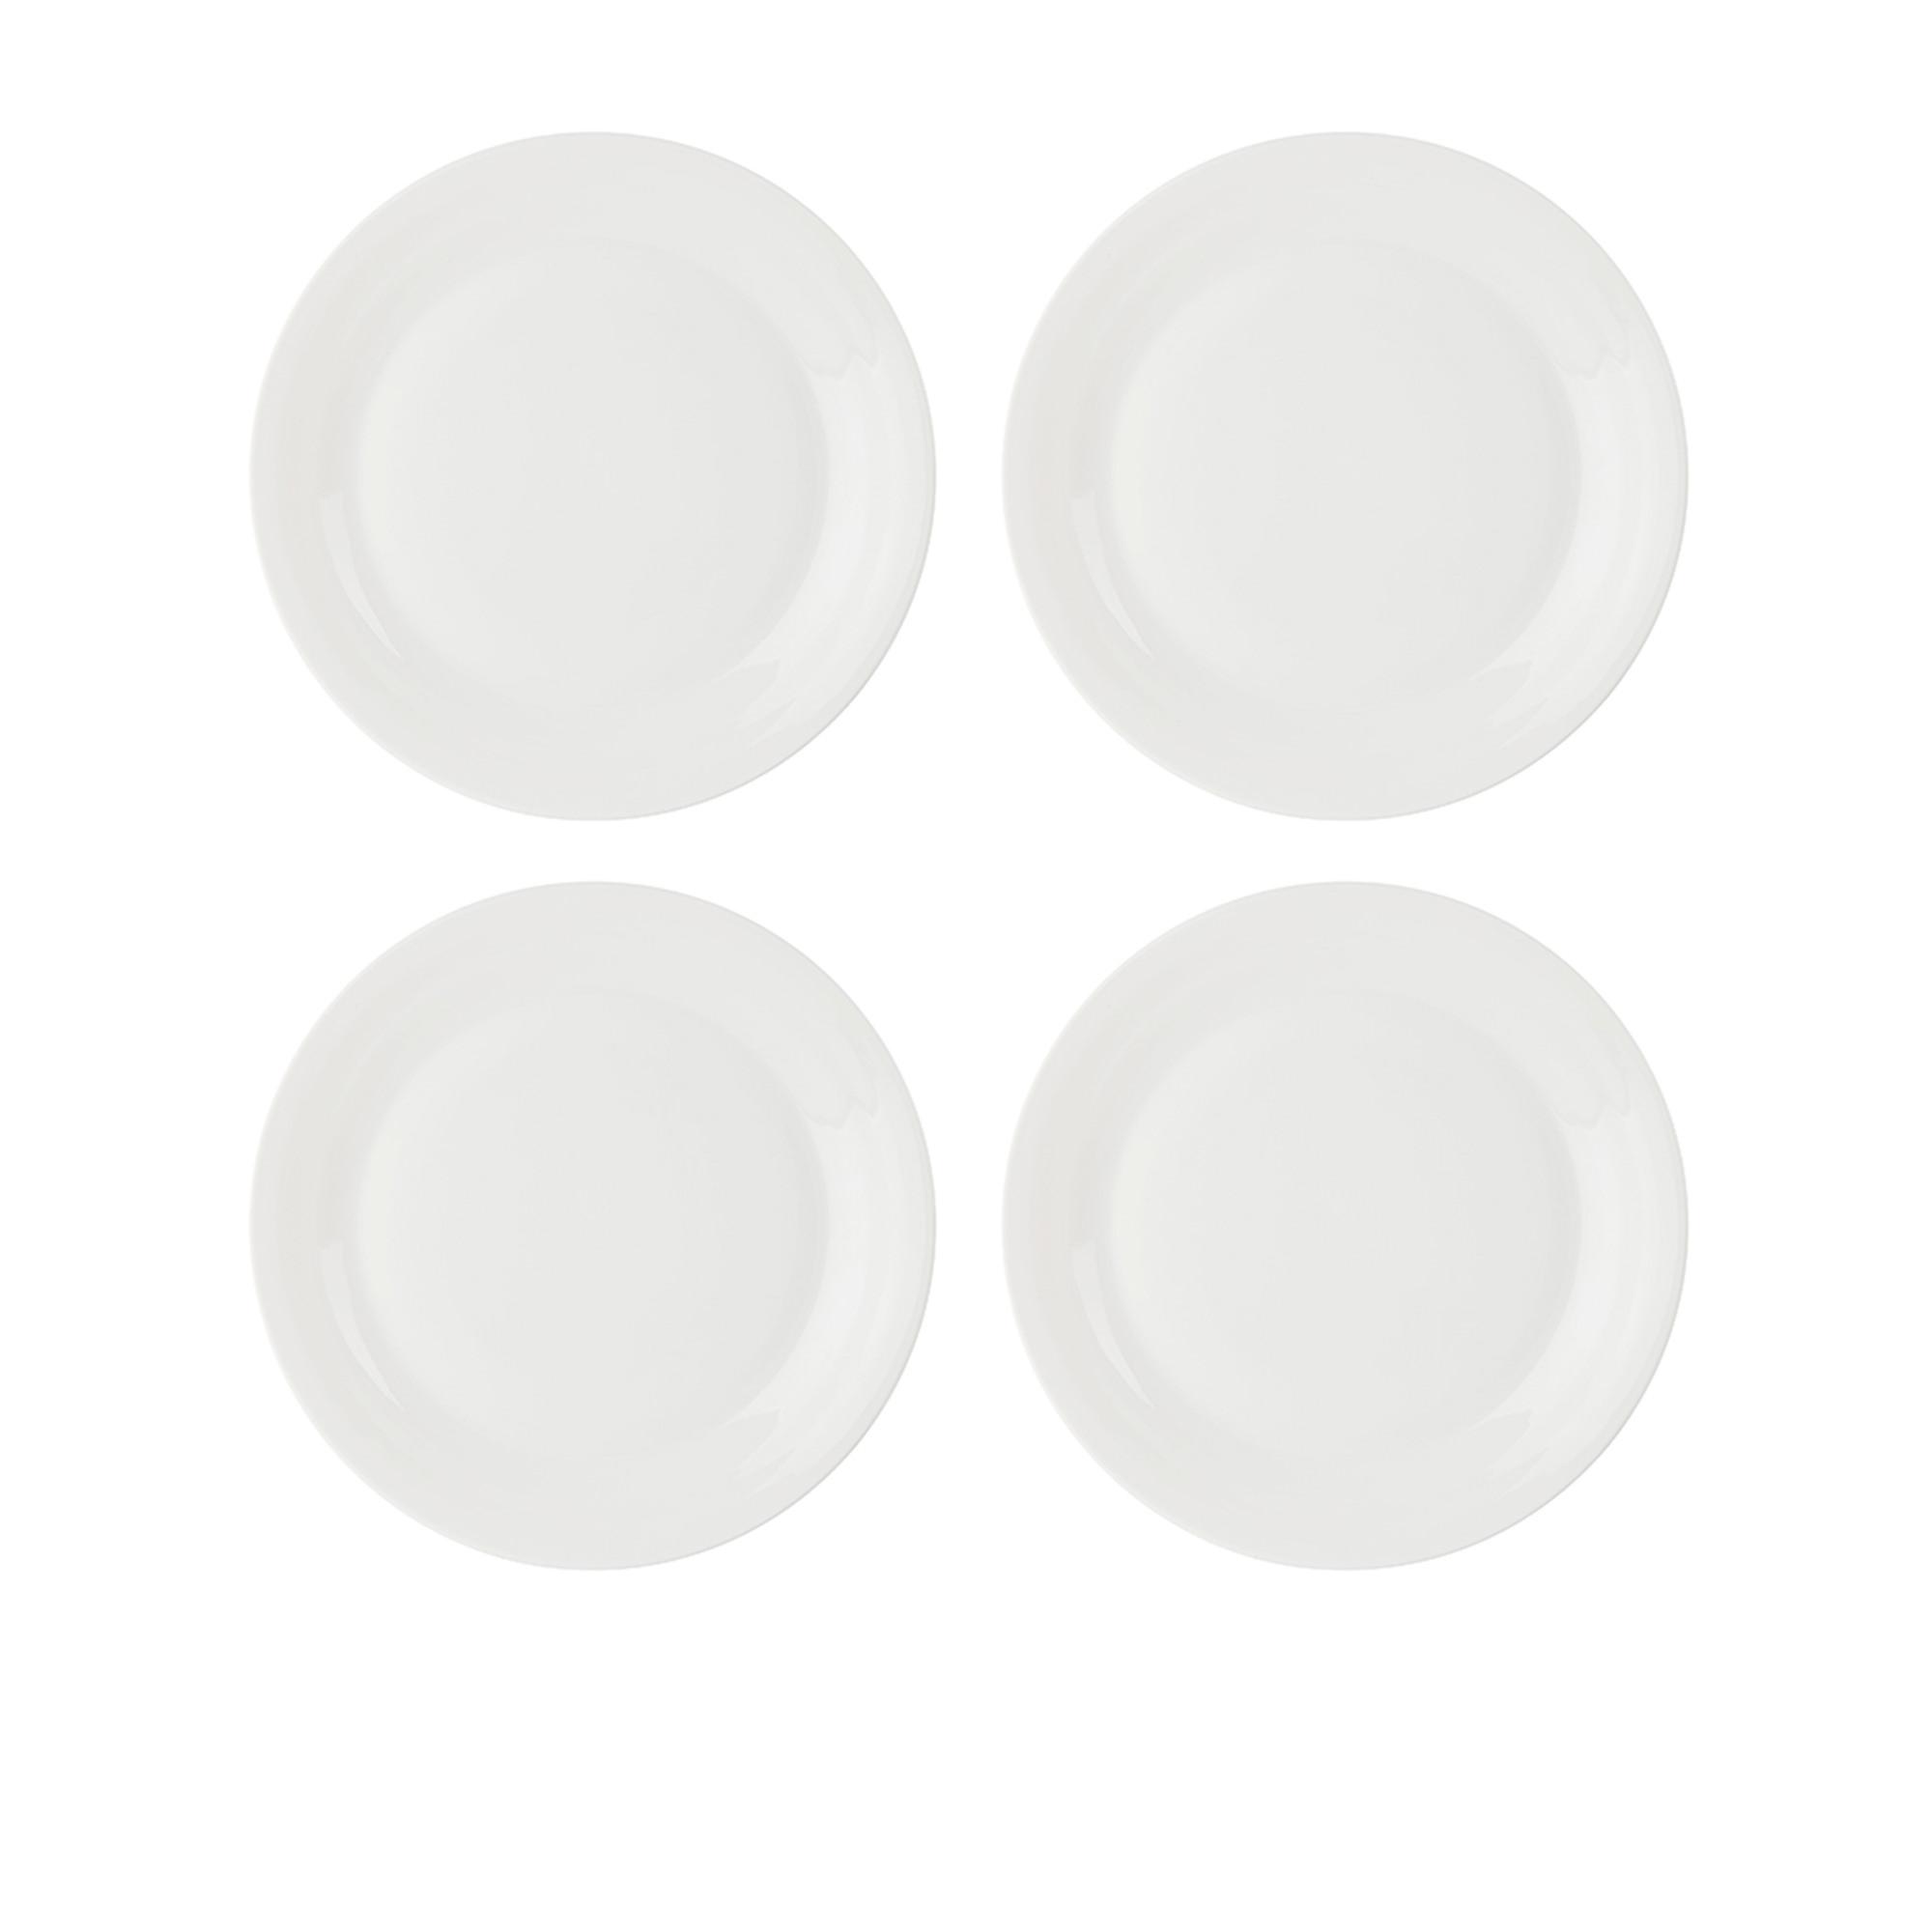 Royal Doulton 1815 Pure Dinner Plate Set of 4 White Image 1